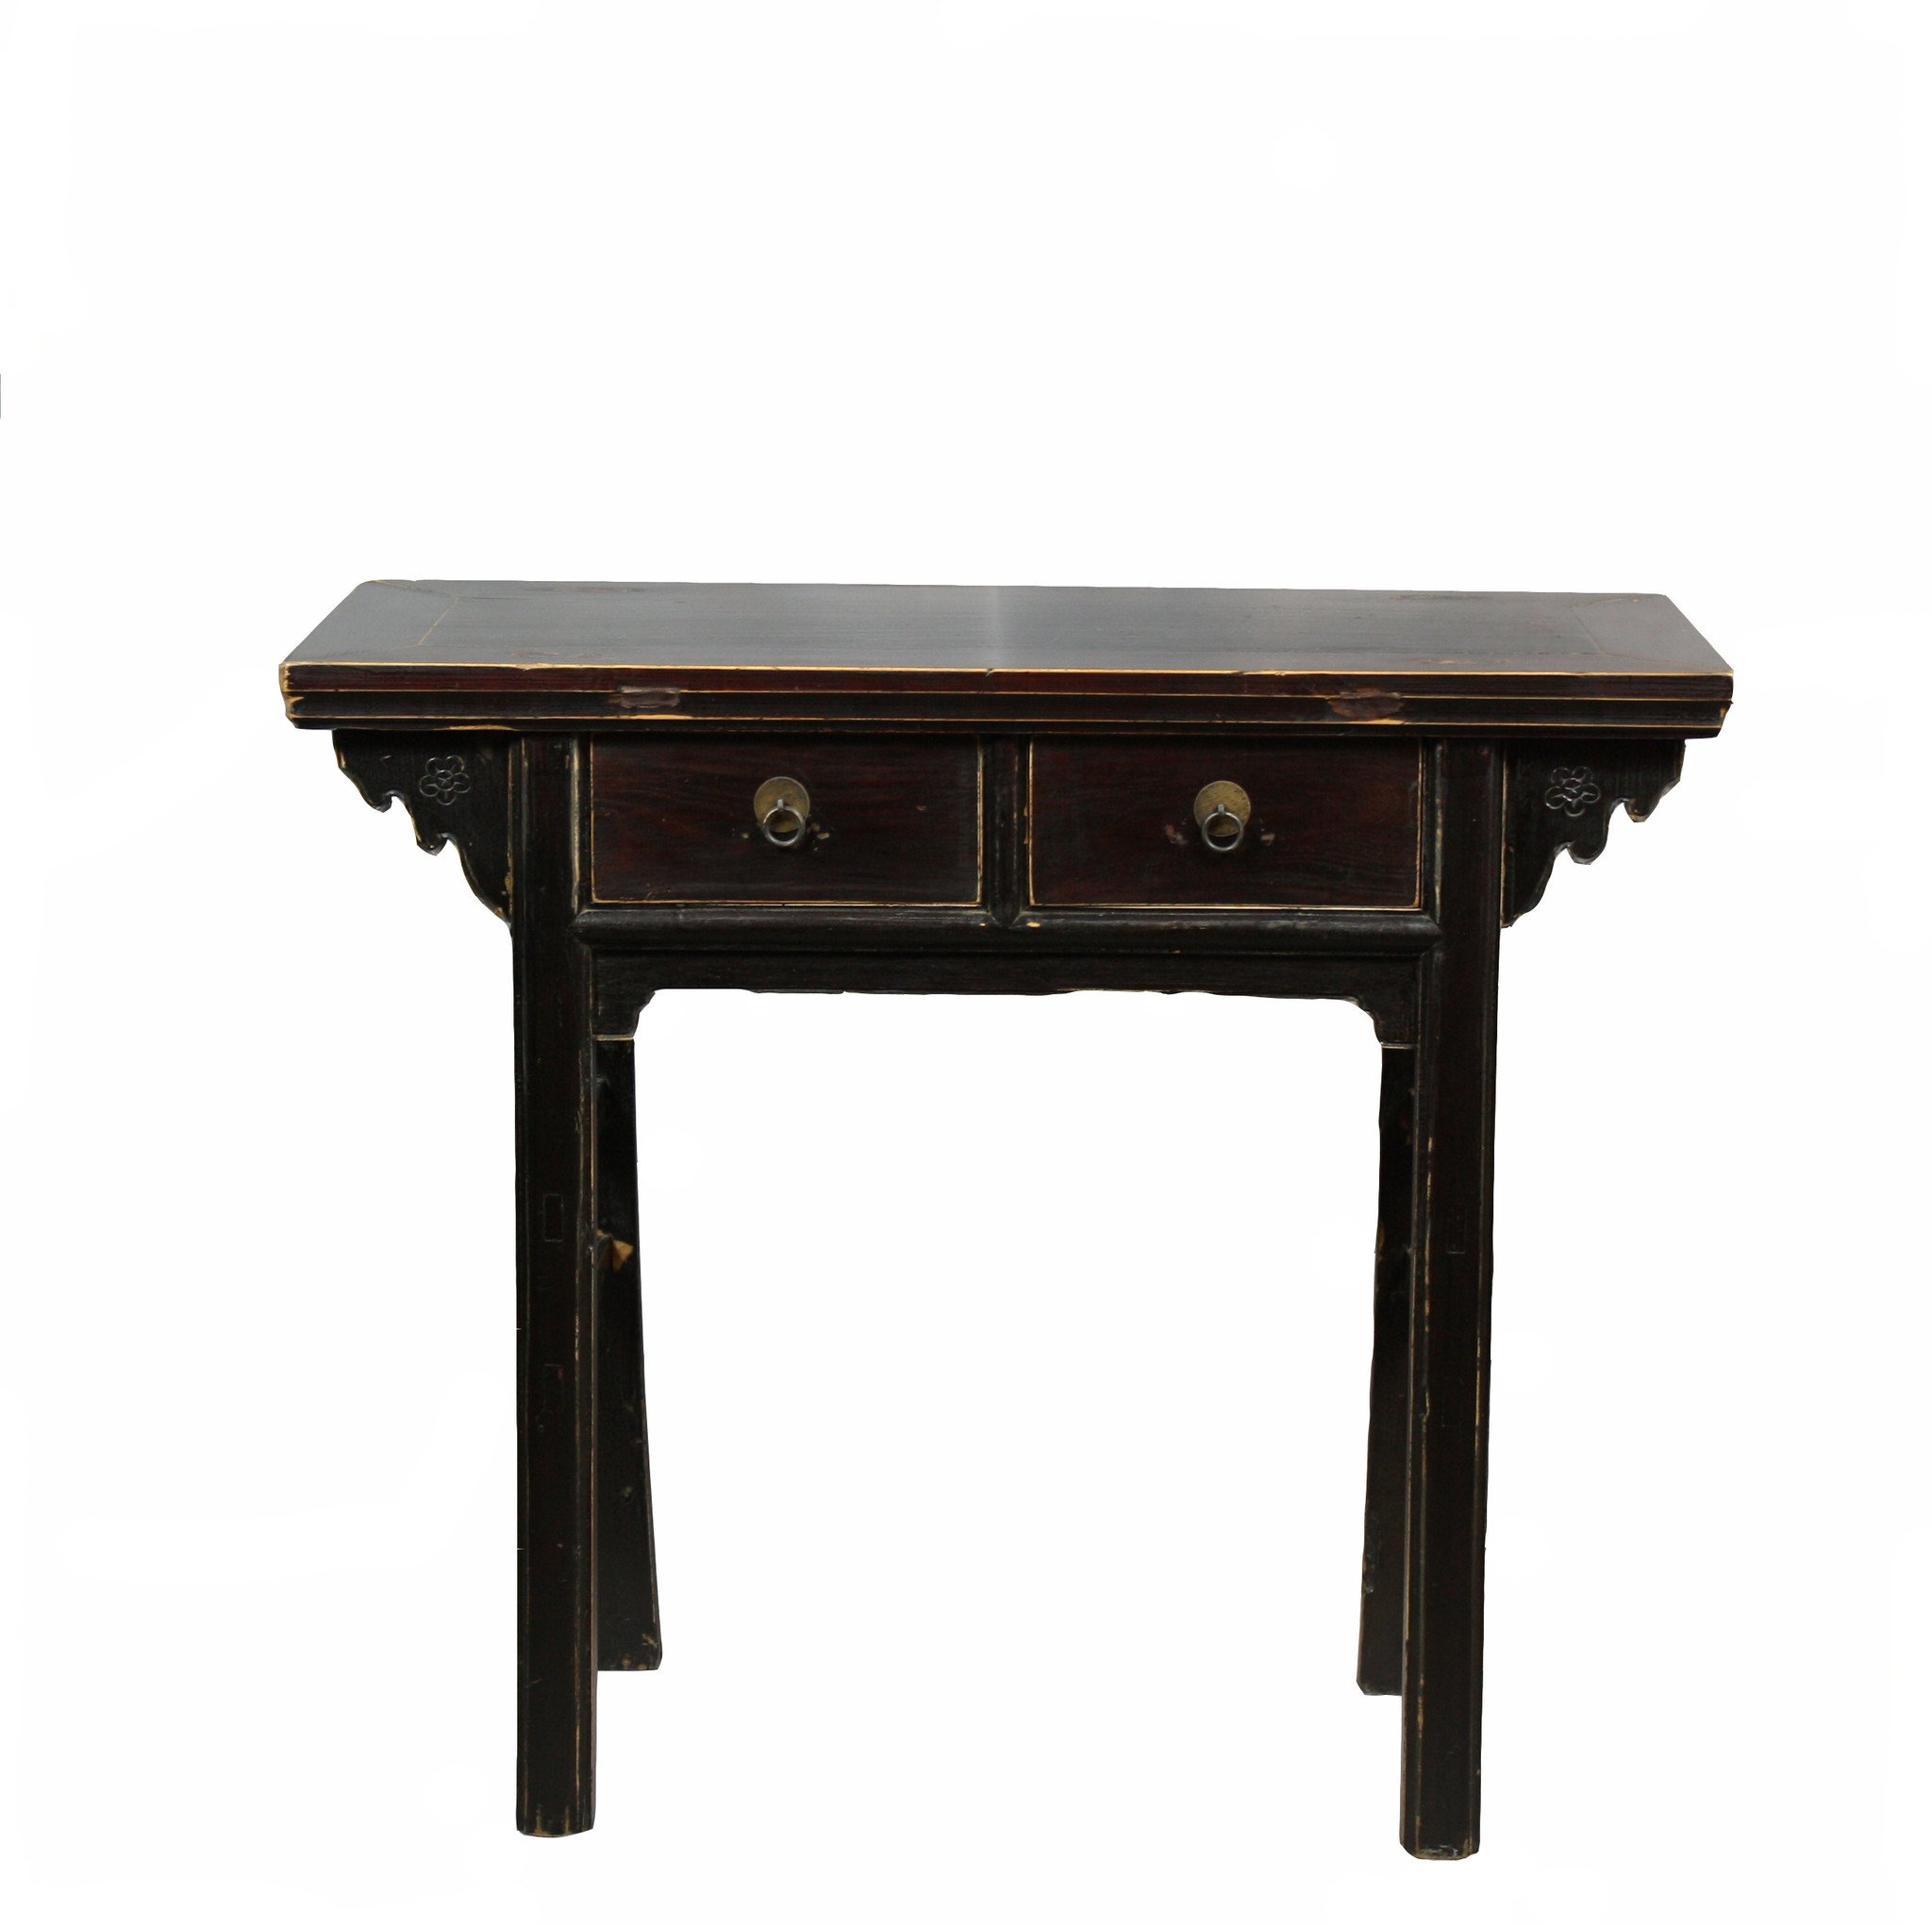 two drawer black accent table dyag east ashley furniture company drop leaf pretty round tablecloths nautical bedroom style end tables hobby lobby decorations metal console with